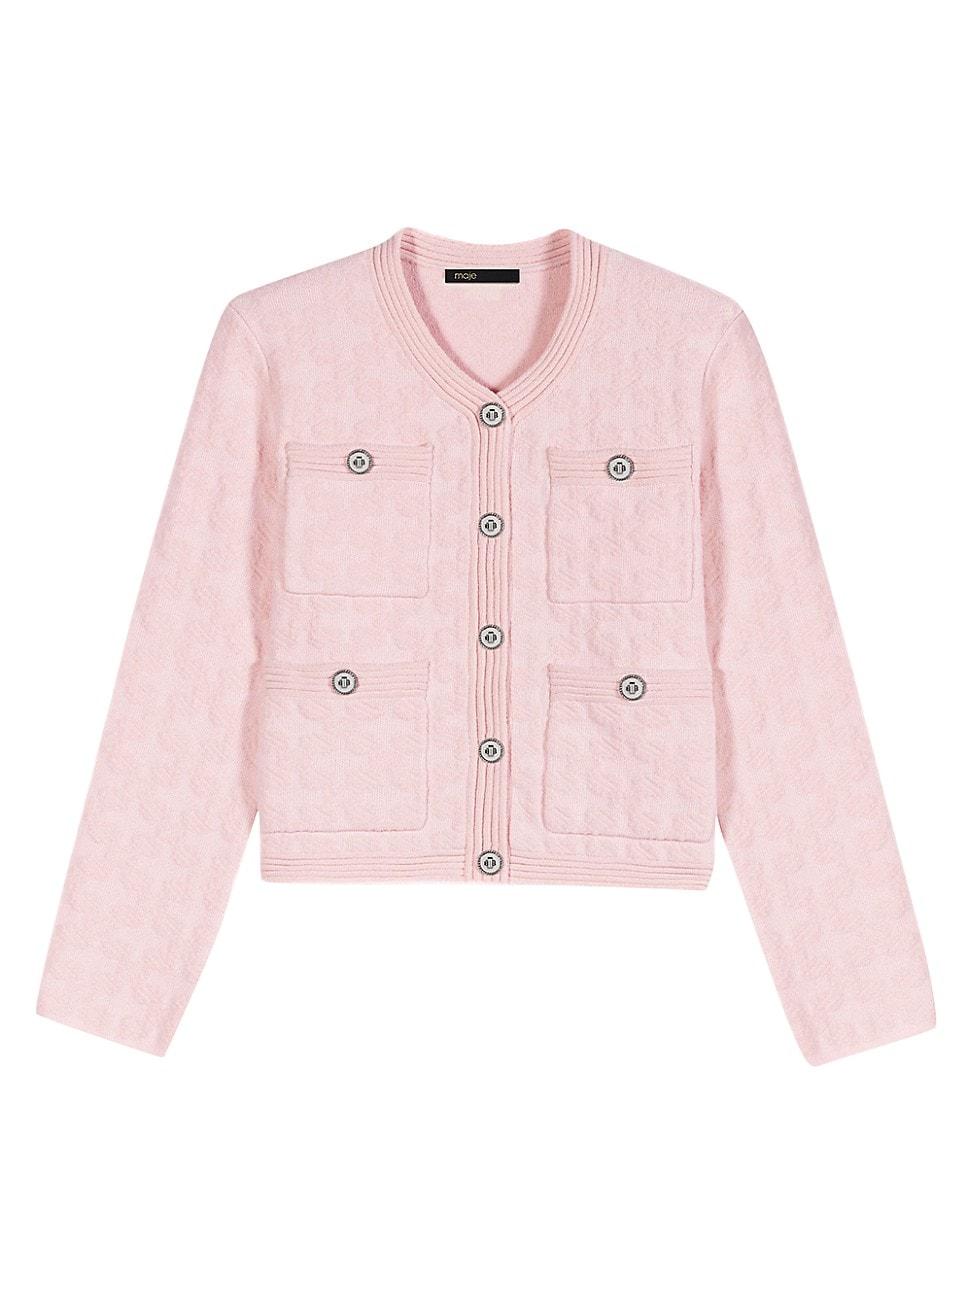 Maje Textured Knit Cardigan in Pink | Lyst